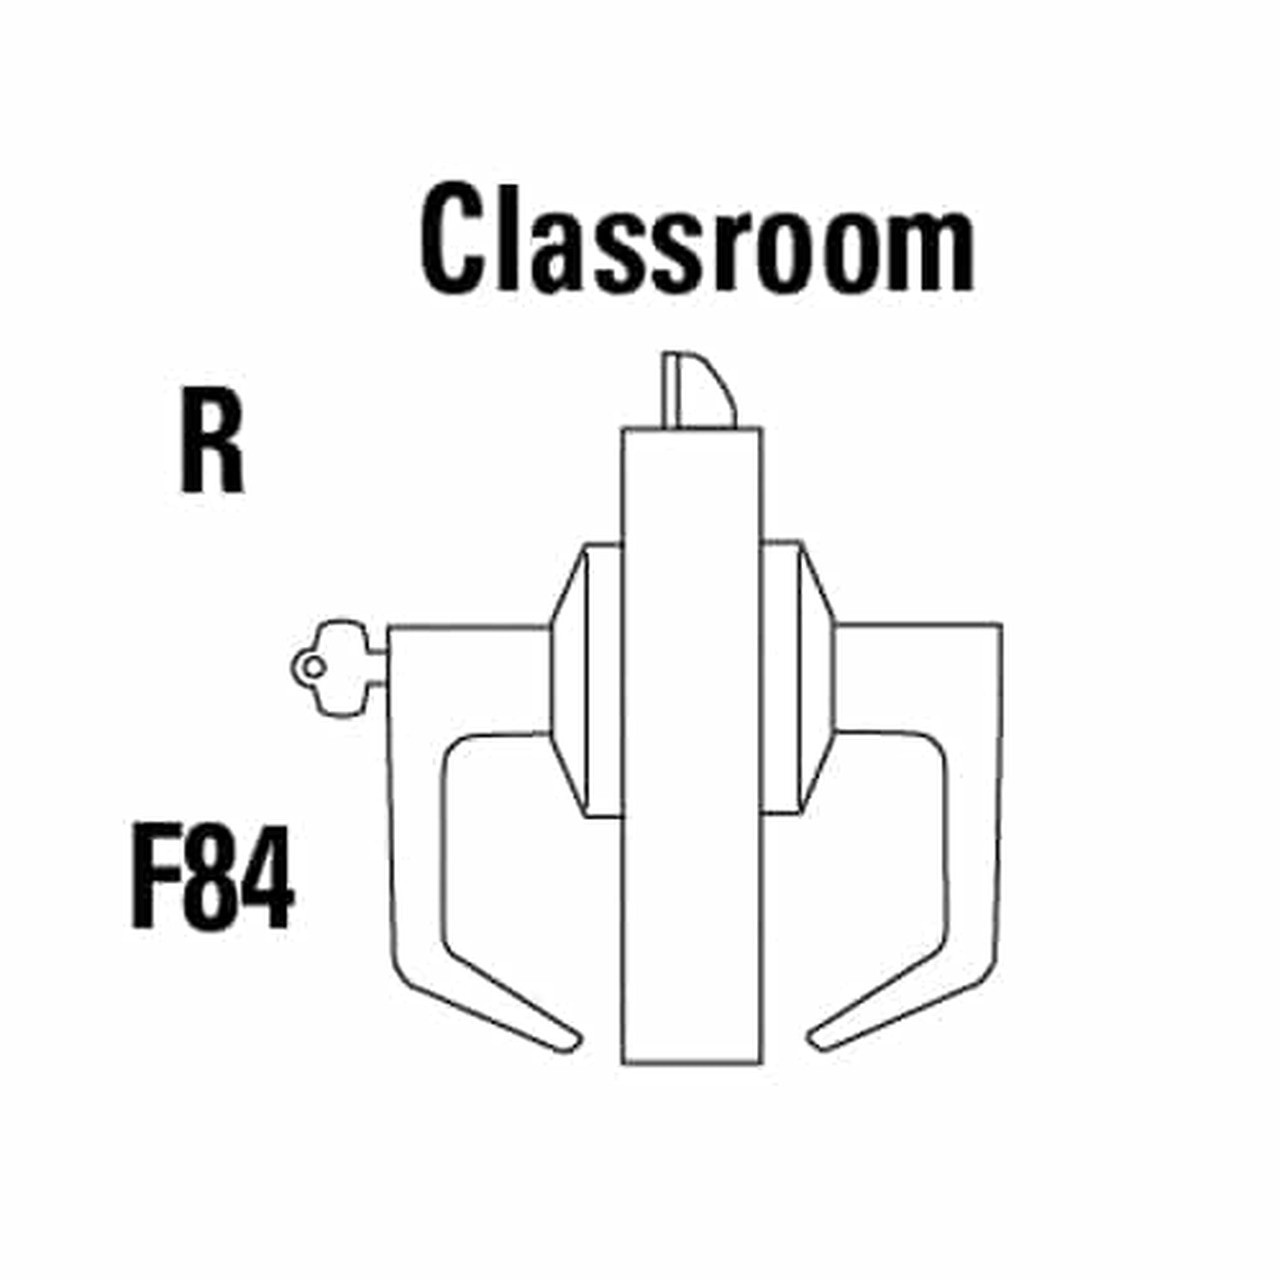 9K47R15KS3619 Best 9K Series Classroom Cylindrical Lever Locks with Contour Angle with Return Lever Design Accept 7 Pin Best Core in Satin Nickel